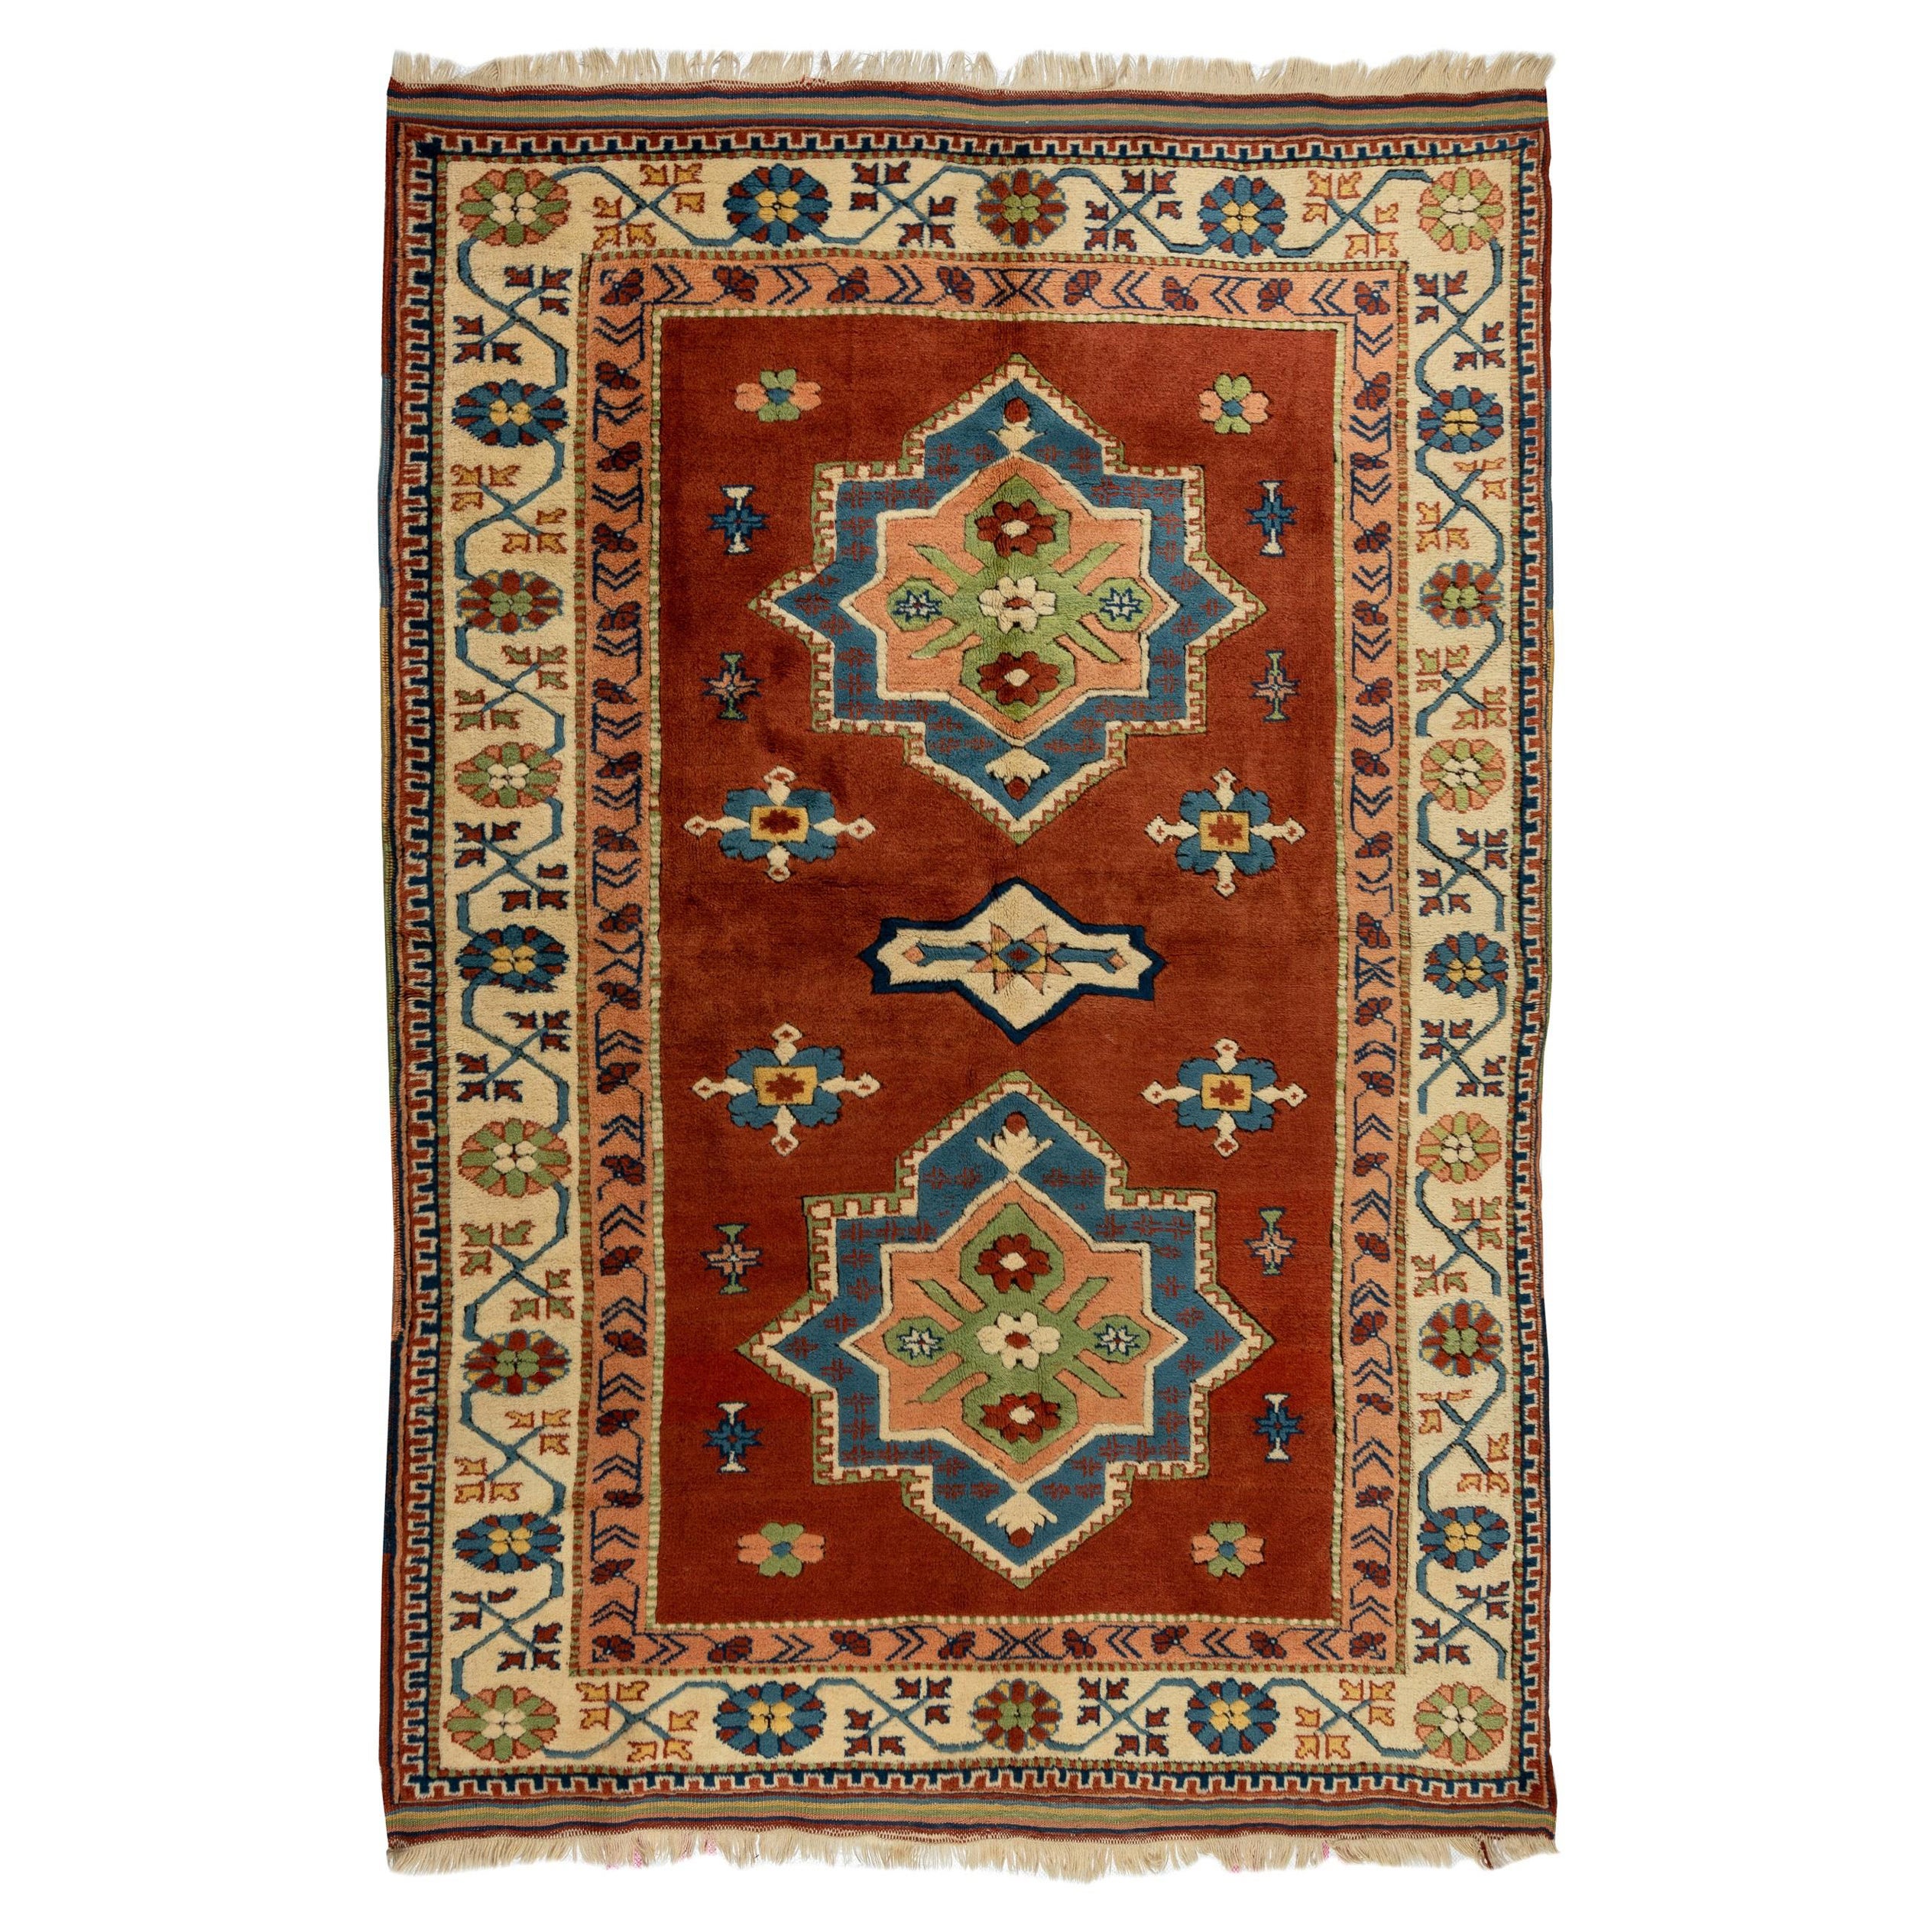 6x8 Ft New Hand Made Turkish Area Rug in Red & Beige. All Wool, Soft Medium Pile For Sale